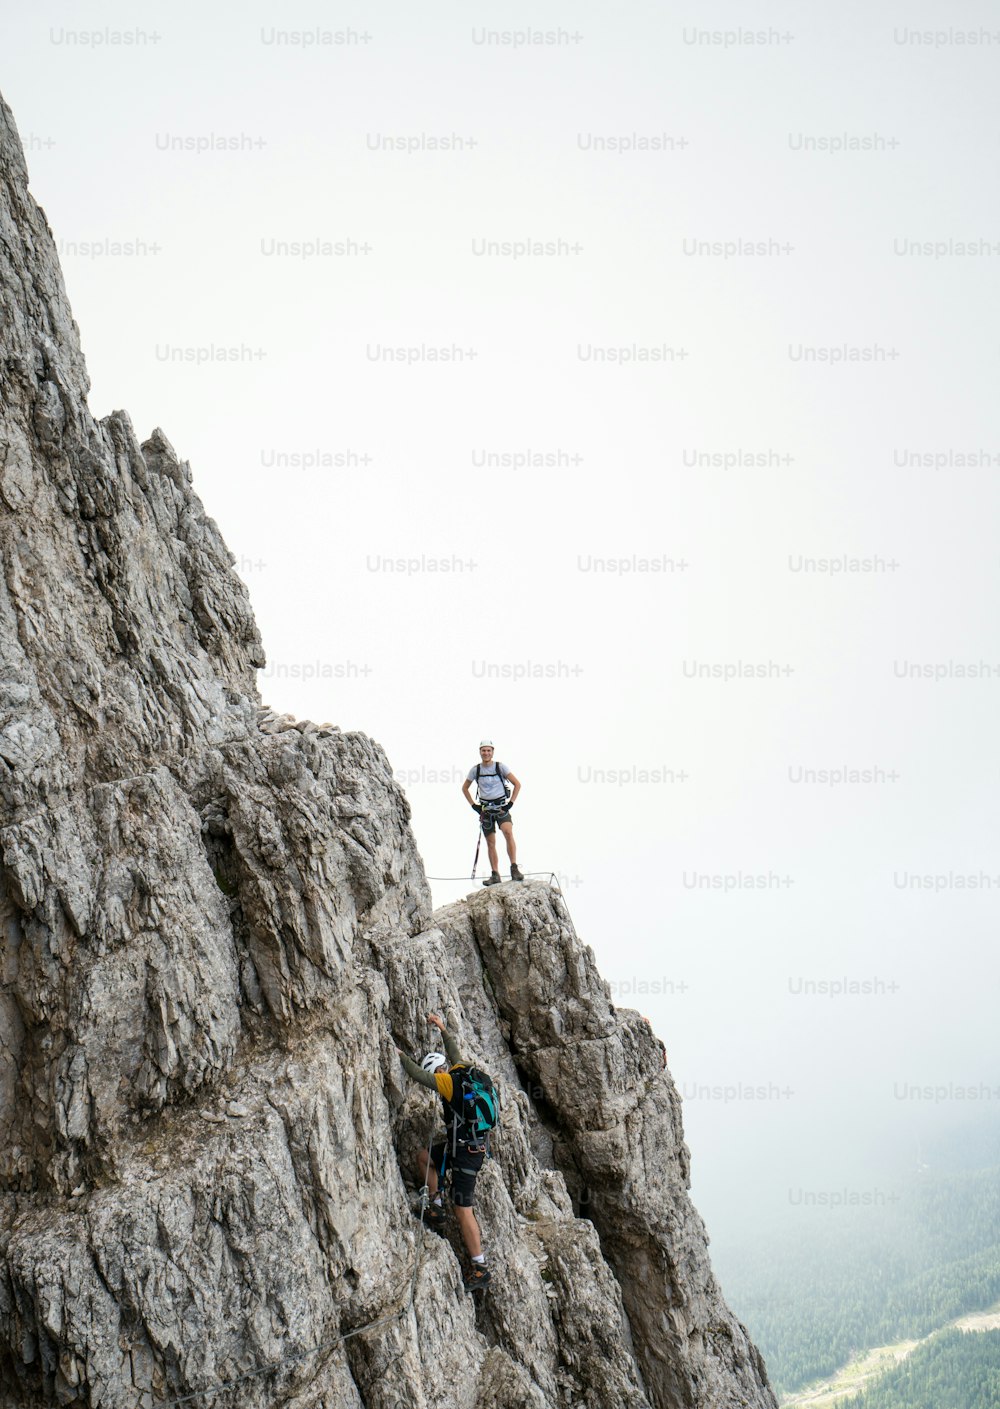 two young attractive male mountain climbers on very exposed Via Ferrata in Alta Badia in the Italian Dolomites